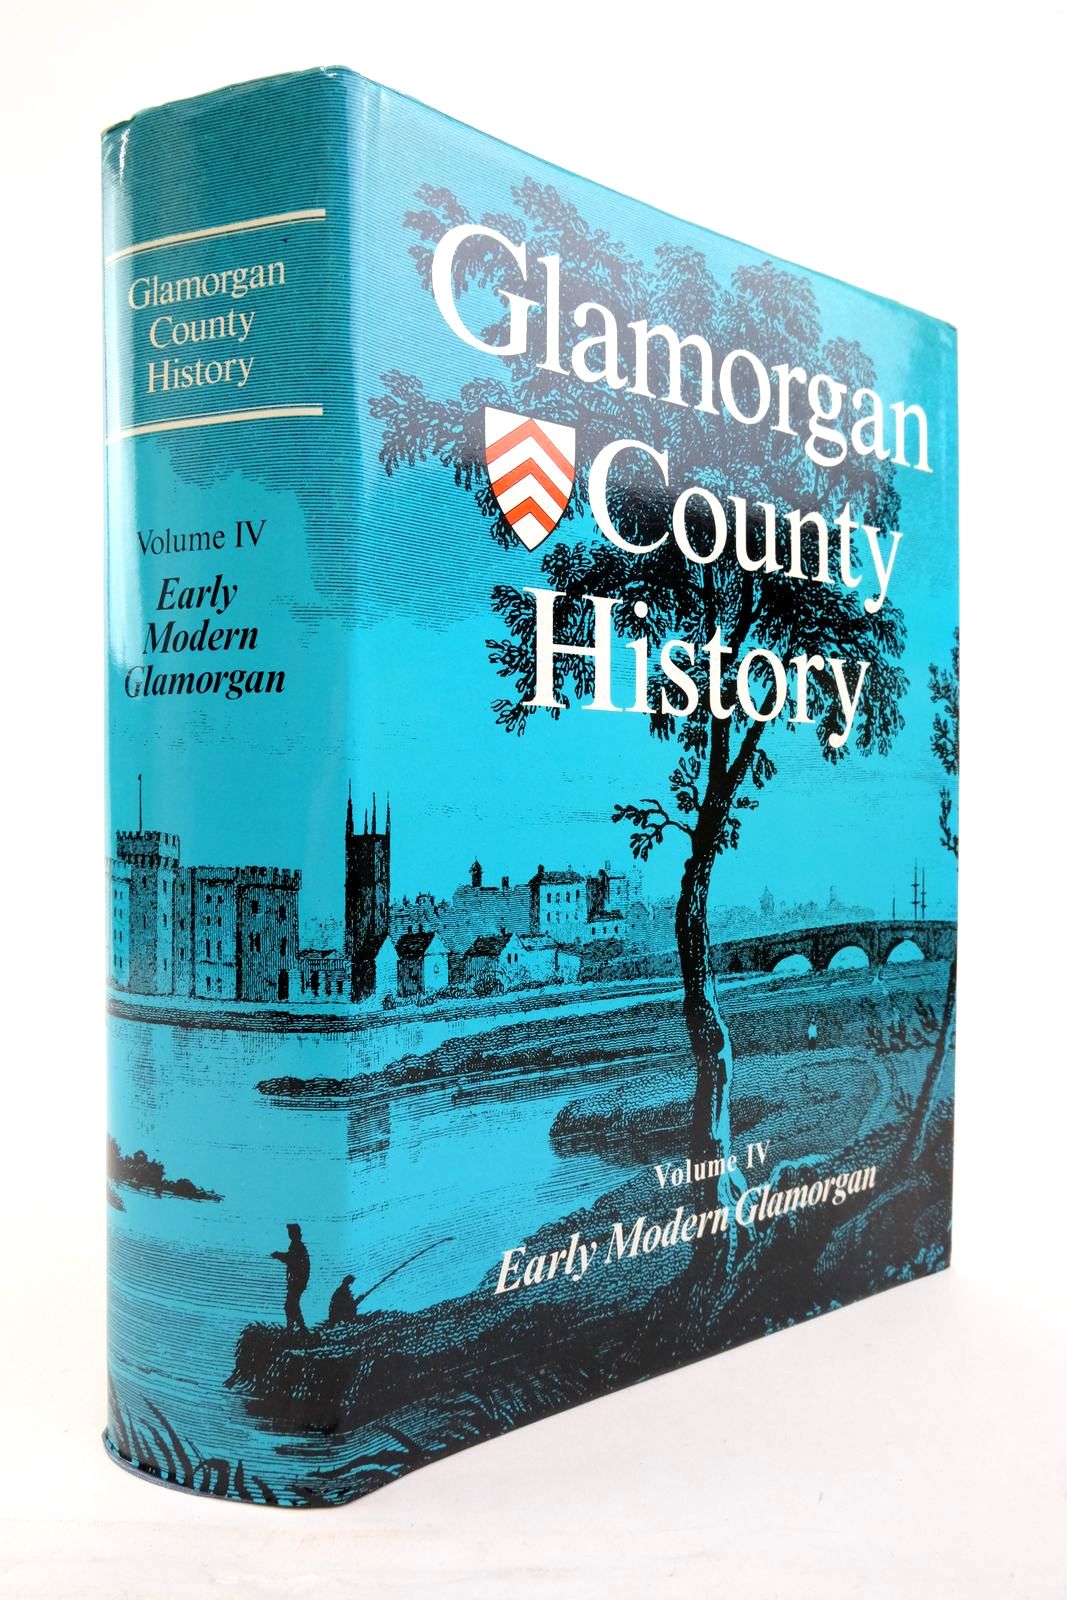 Photo of GLAMORGAN COUNTY HISTORY VOLUME IV EARLY MODERN GLAMORGAN written by Williams, Glanmor published by Glamorgan County History Trust (STOCK CODE: 2137889)  for sale by Stella & Rose's Books